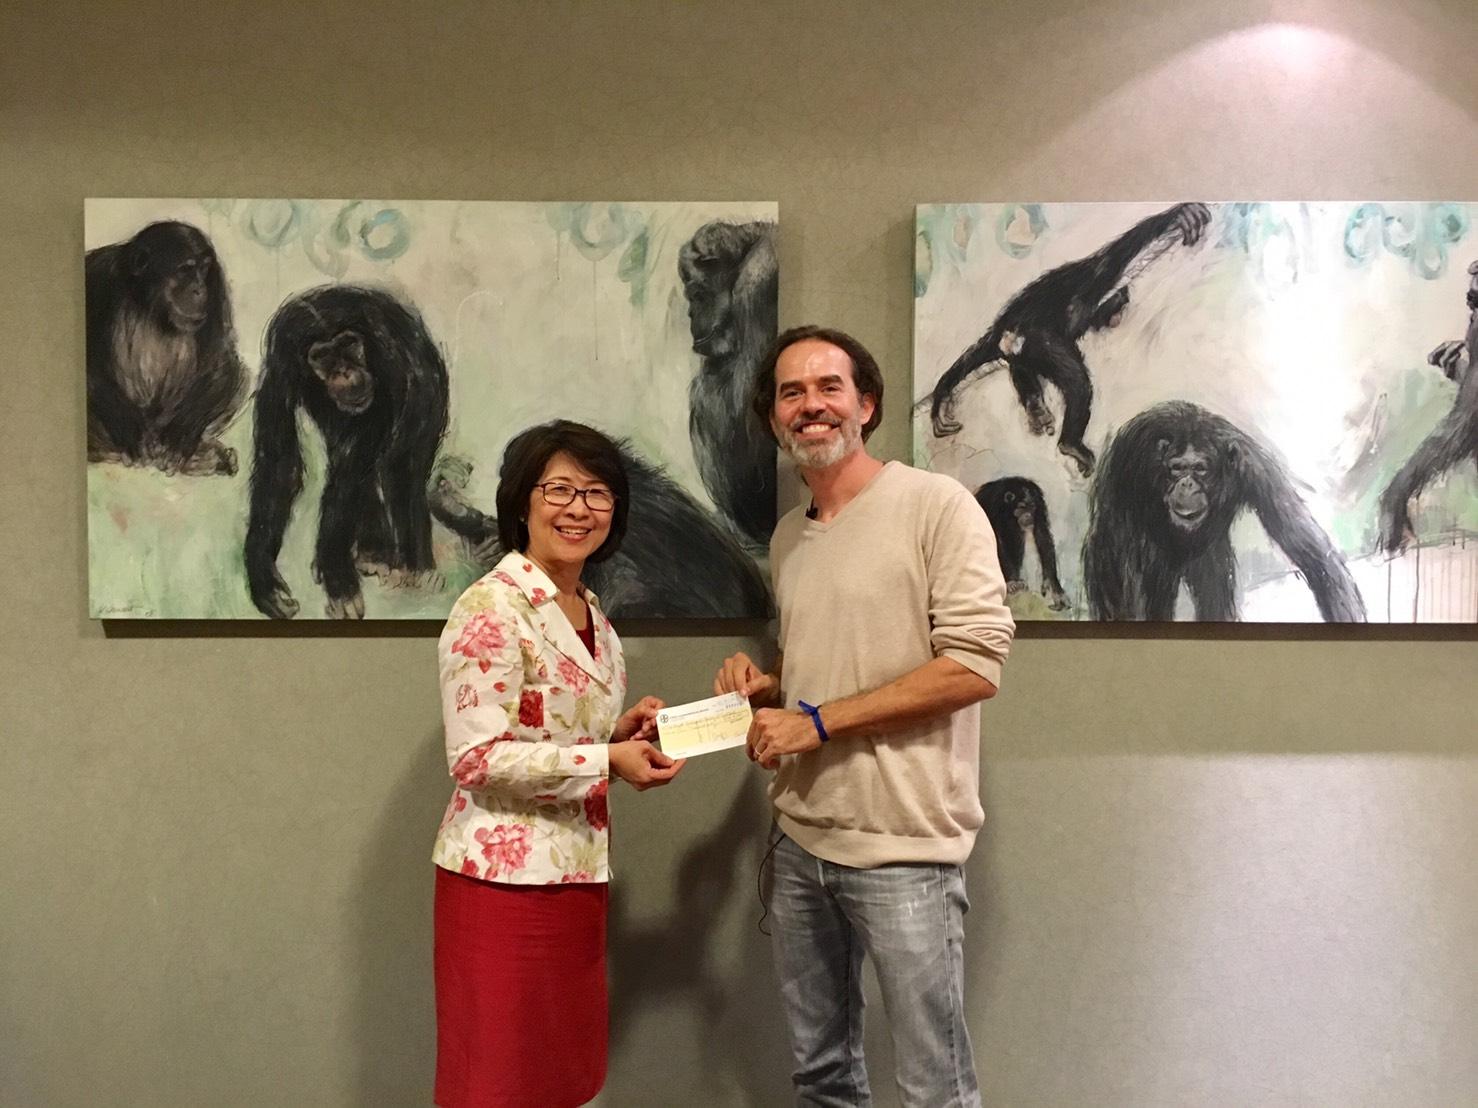 On behalf of the Taiwanese government, Director General Jane Hsu presents a donation cheque to Program Director Arnaud Desbiez of the Giant Armadillo Conservation Program under the Royal Zoological Society of Scotland (8th September 2017 at the RZSS). 